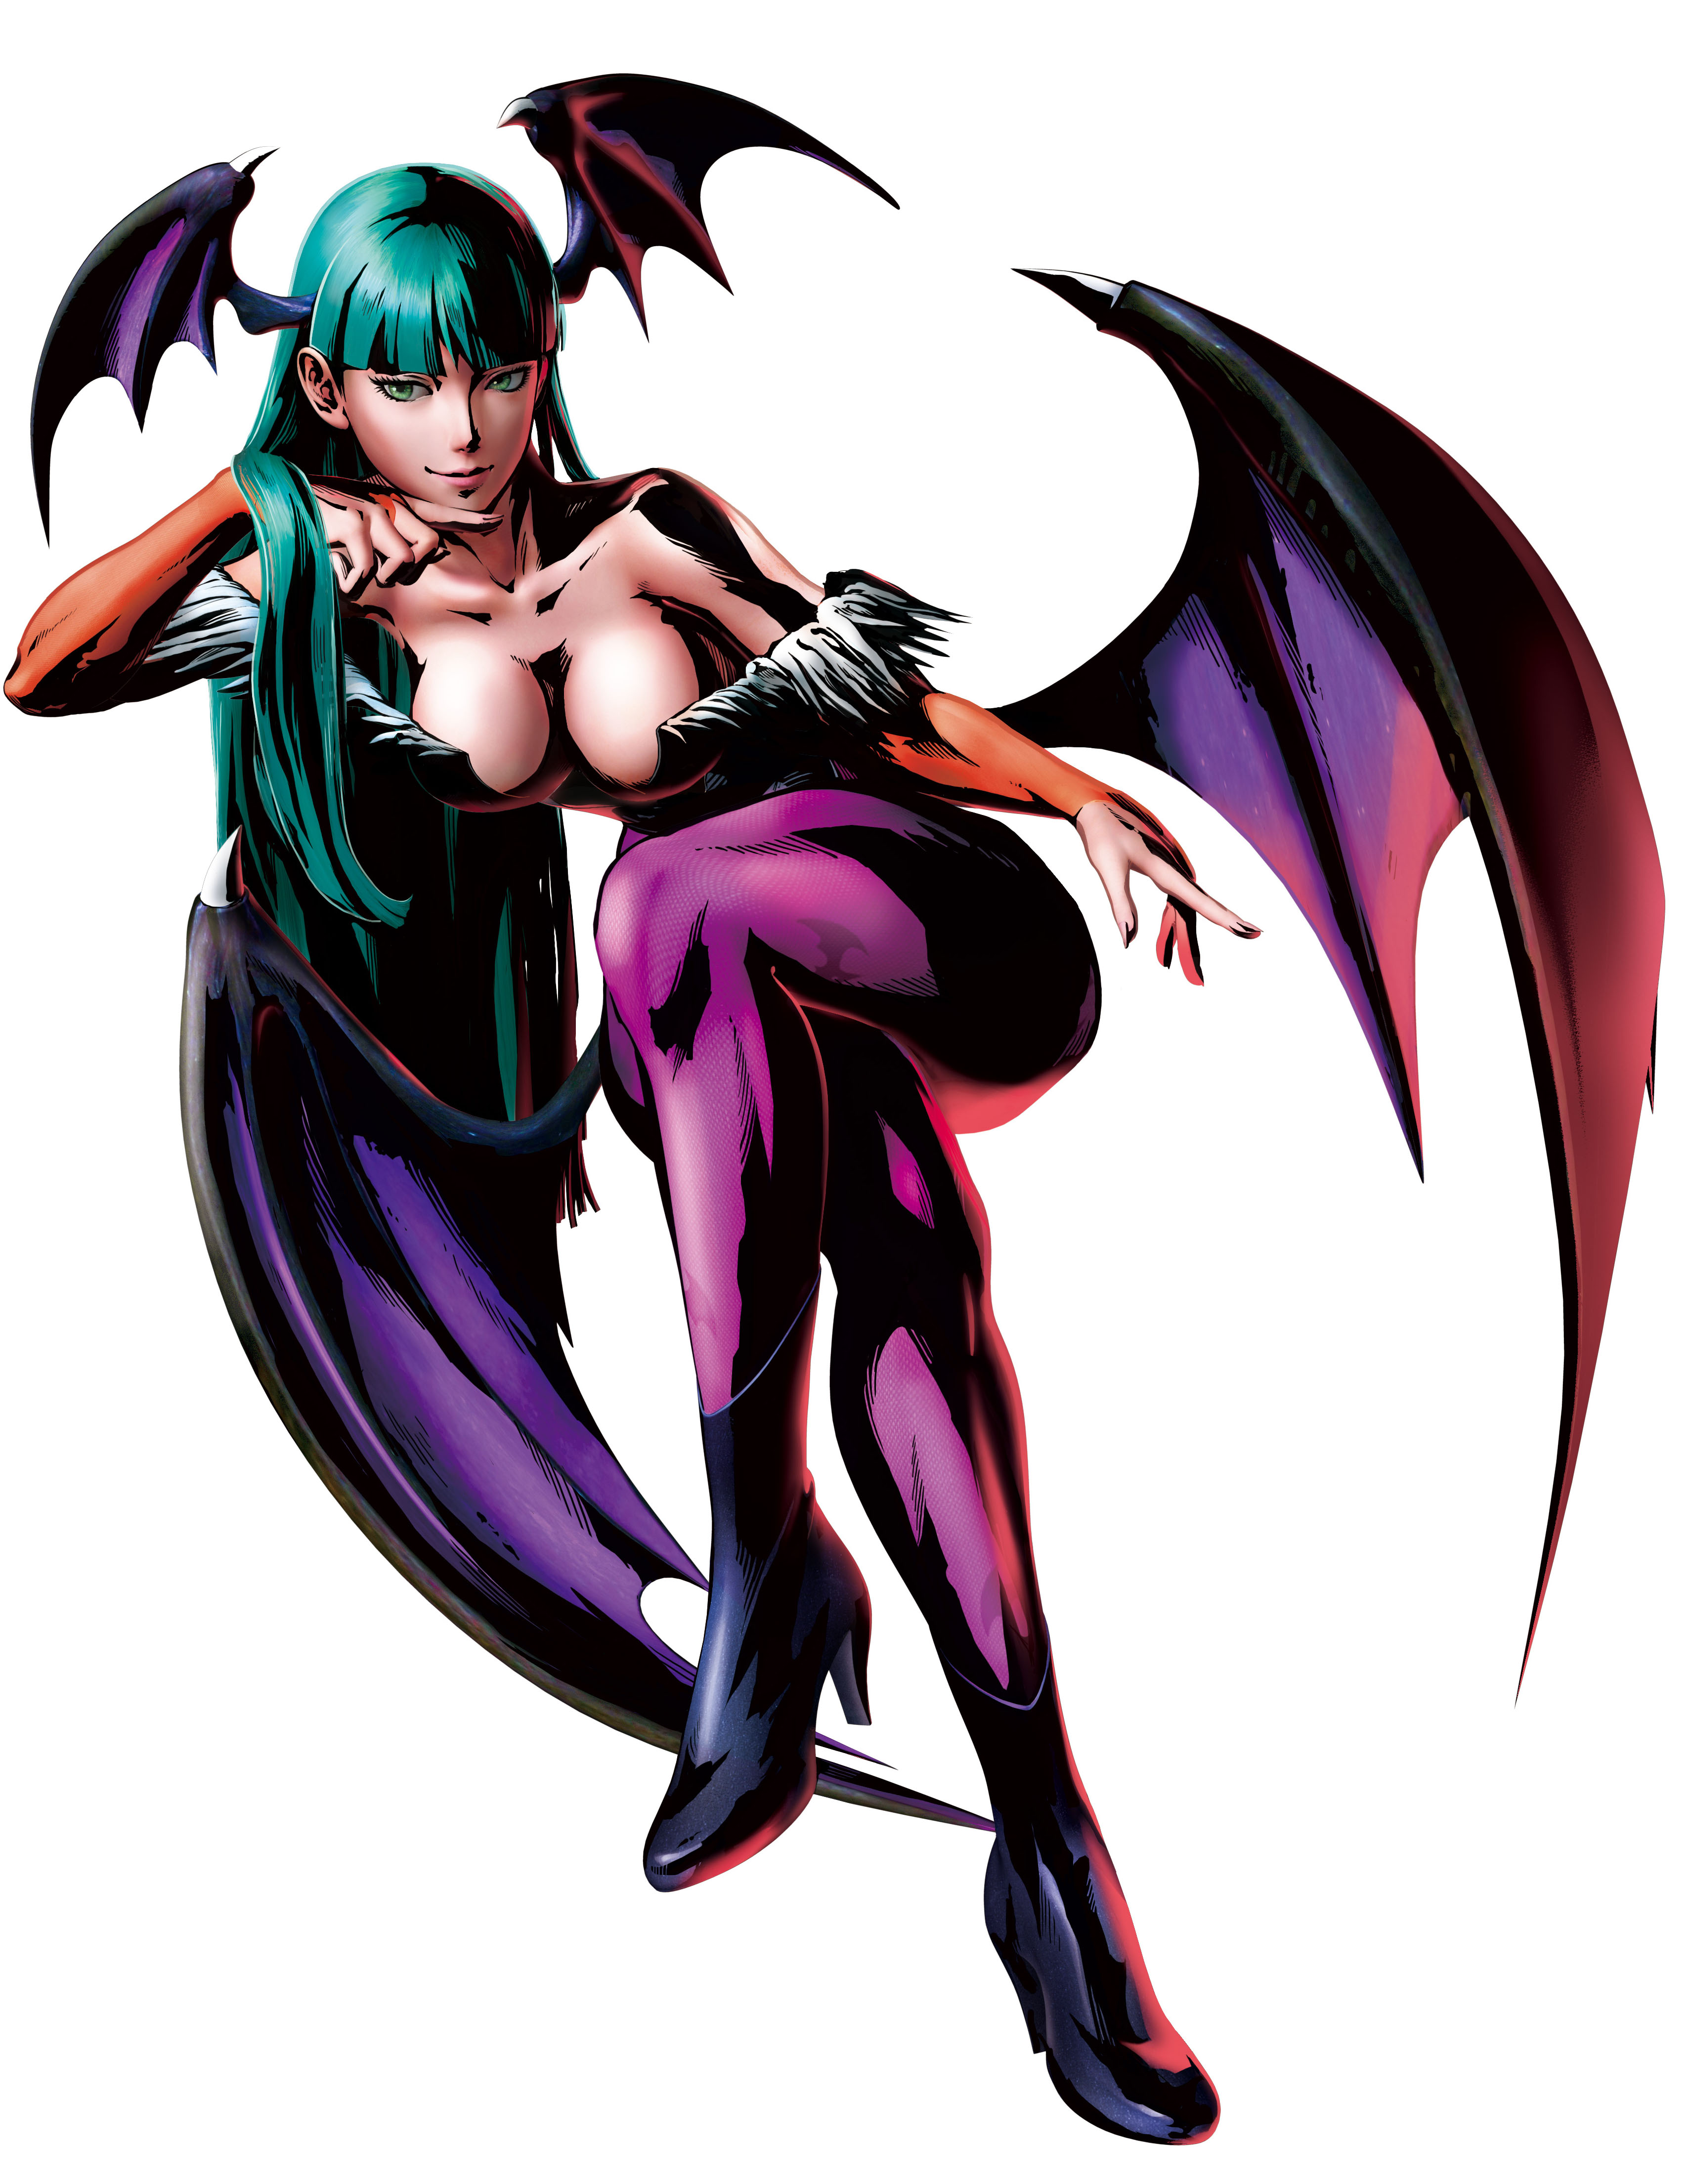 Morrigan Aensland The Sexy Succubus From Darkstalkers